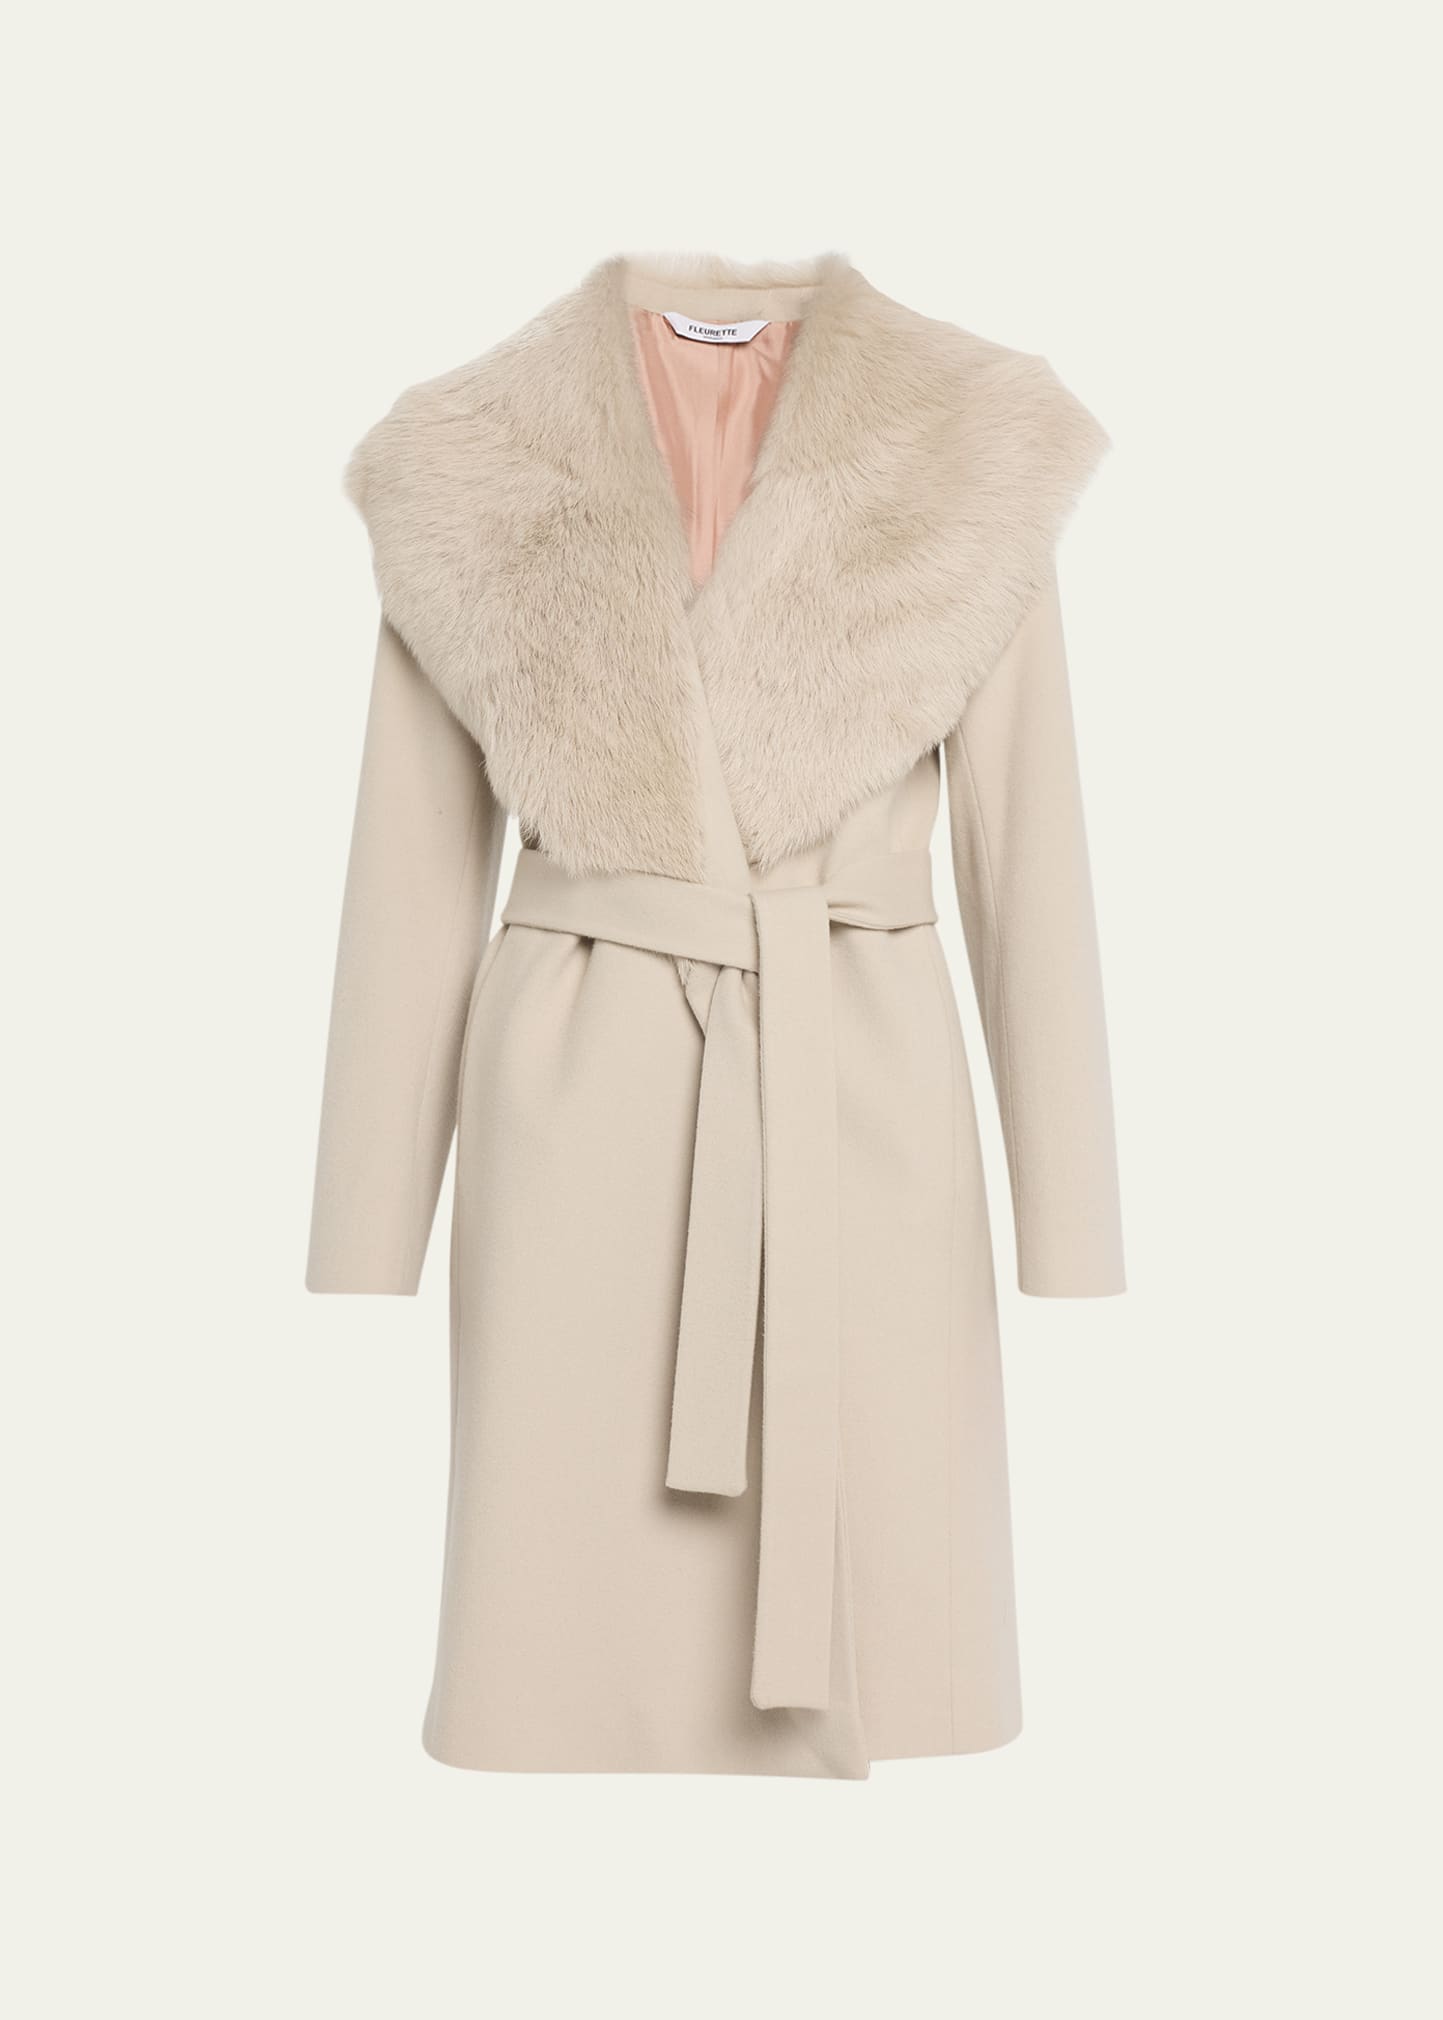 FLEURETTE REESE BELTED WOOL WRAP COAT WITH SHEARLING COLLAR